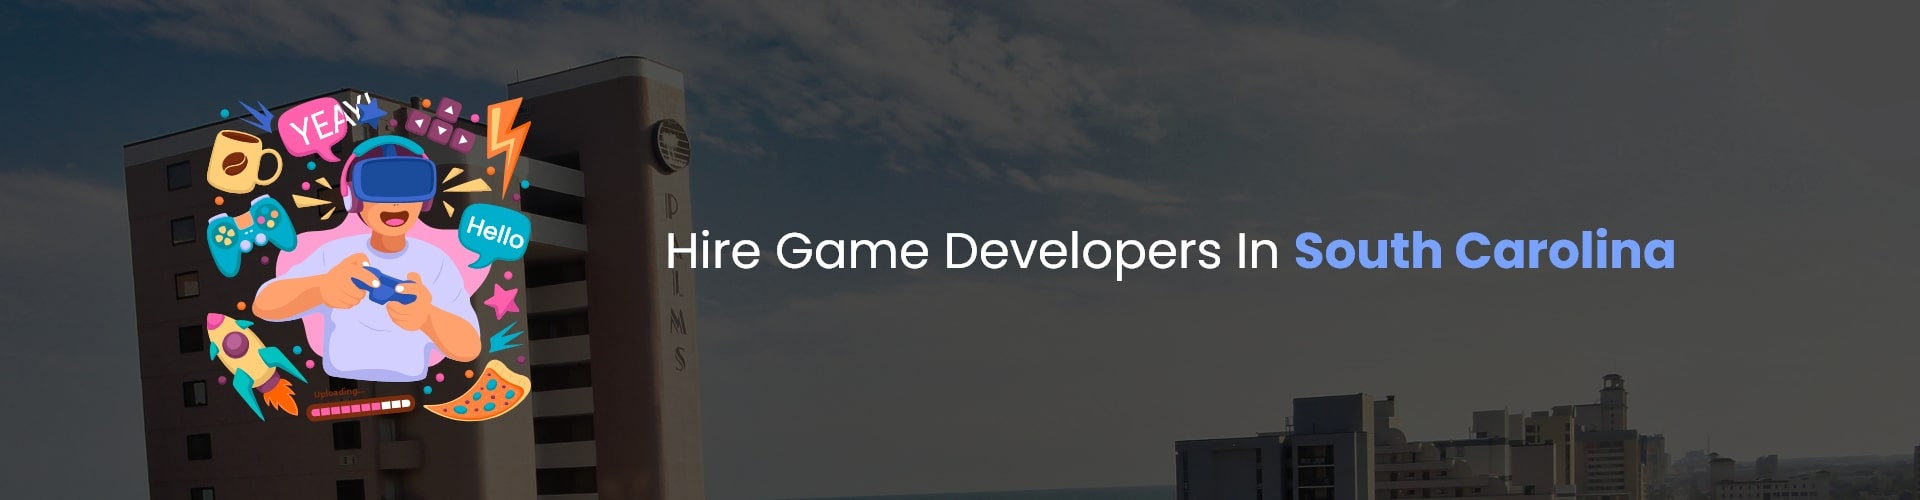 hire game developers in south carolina